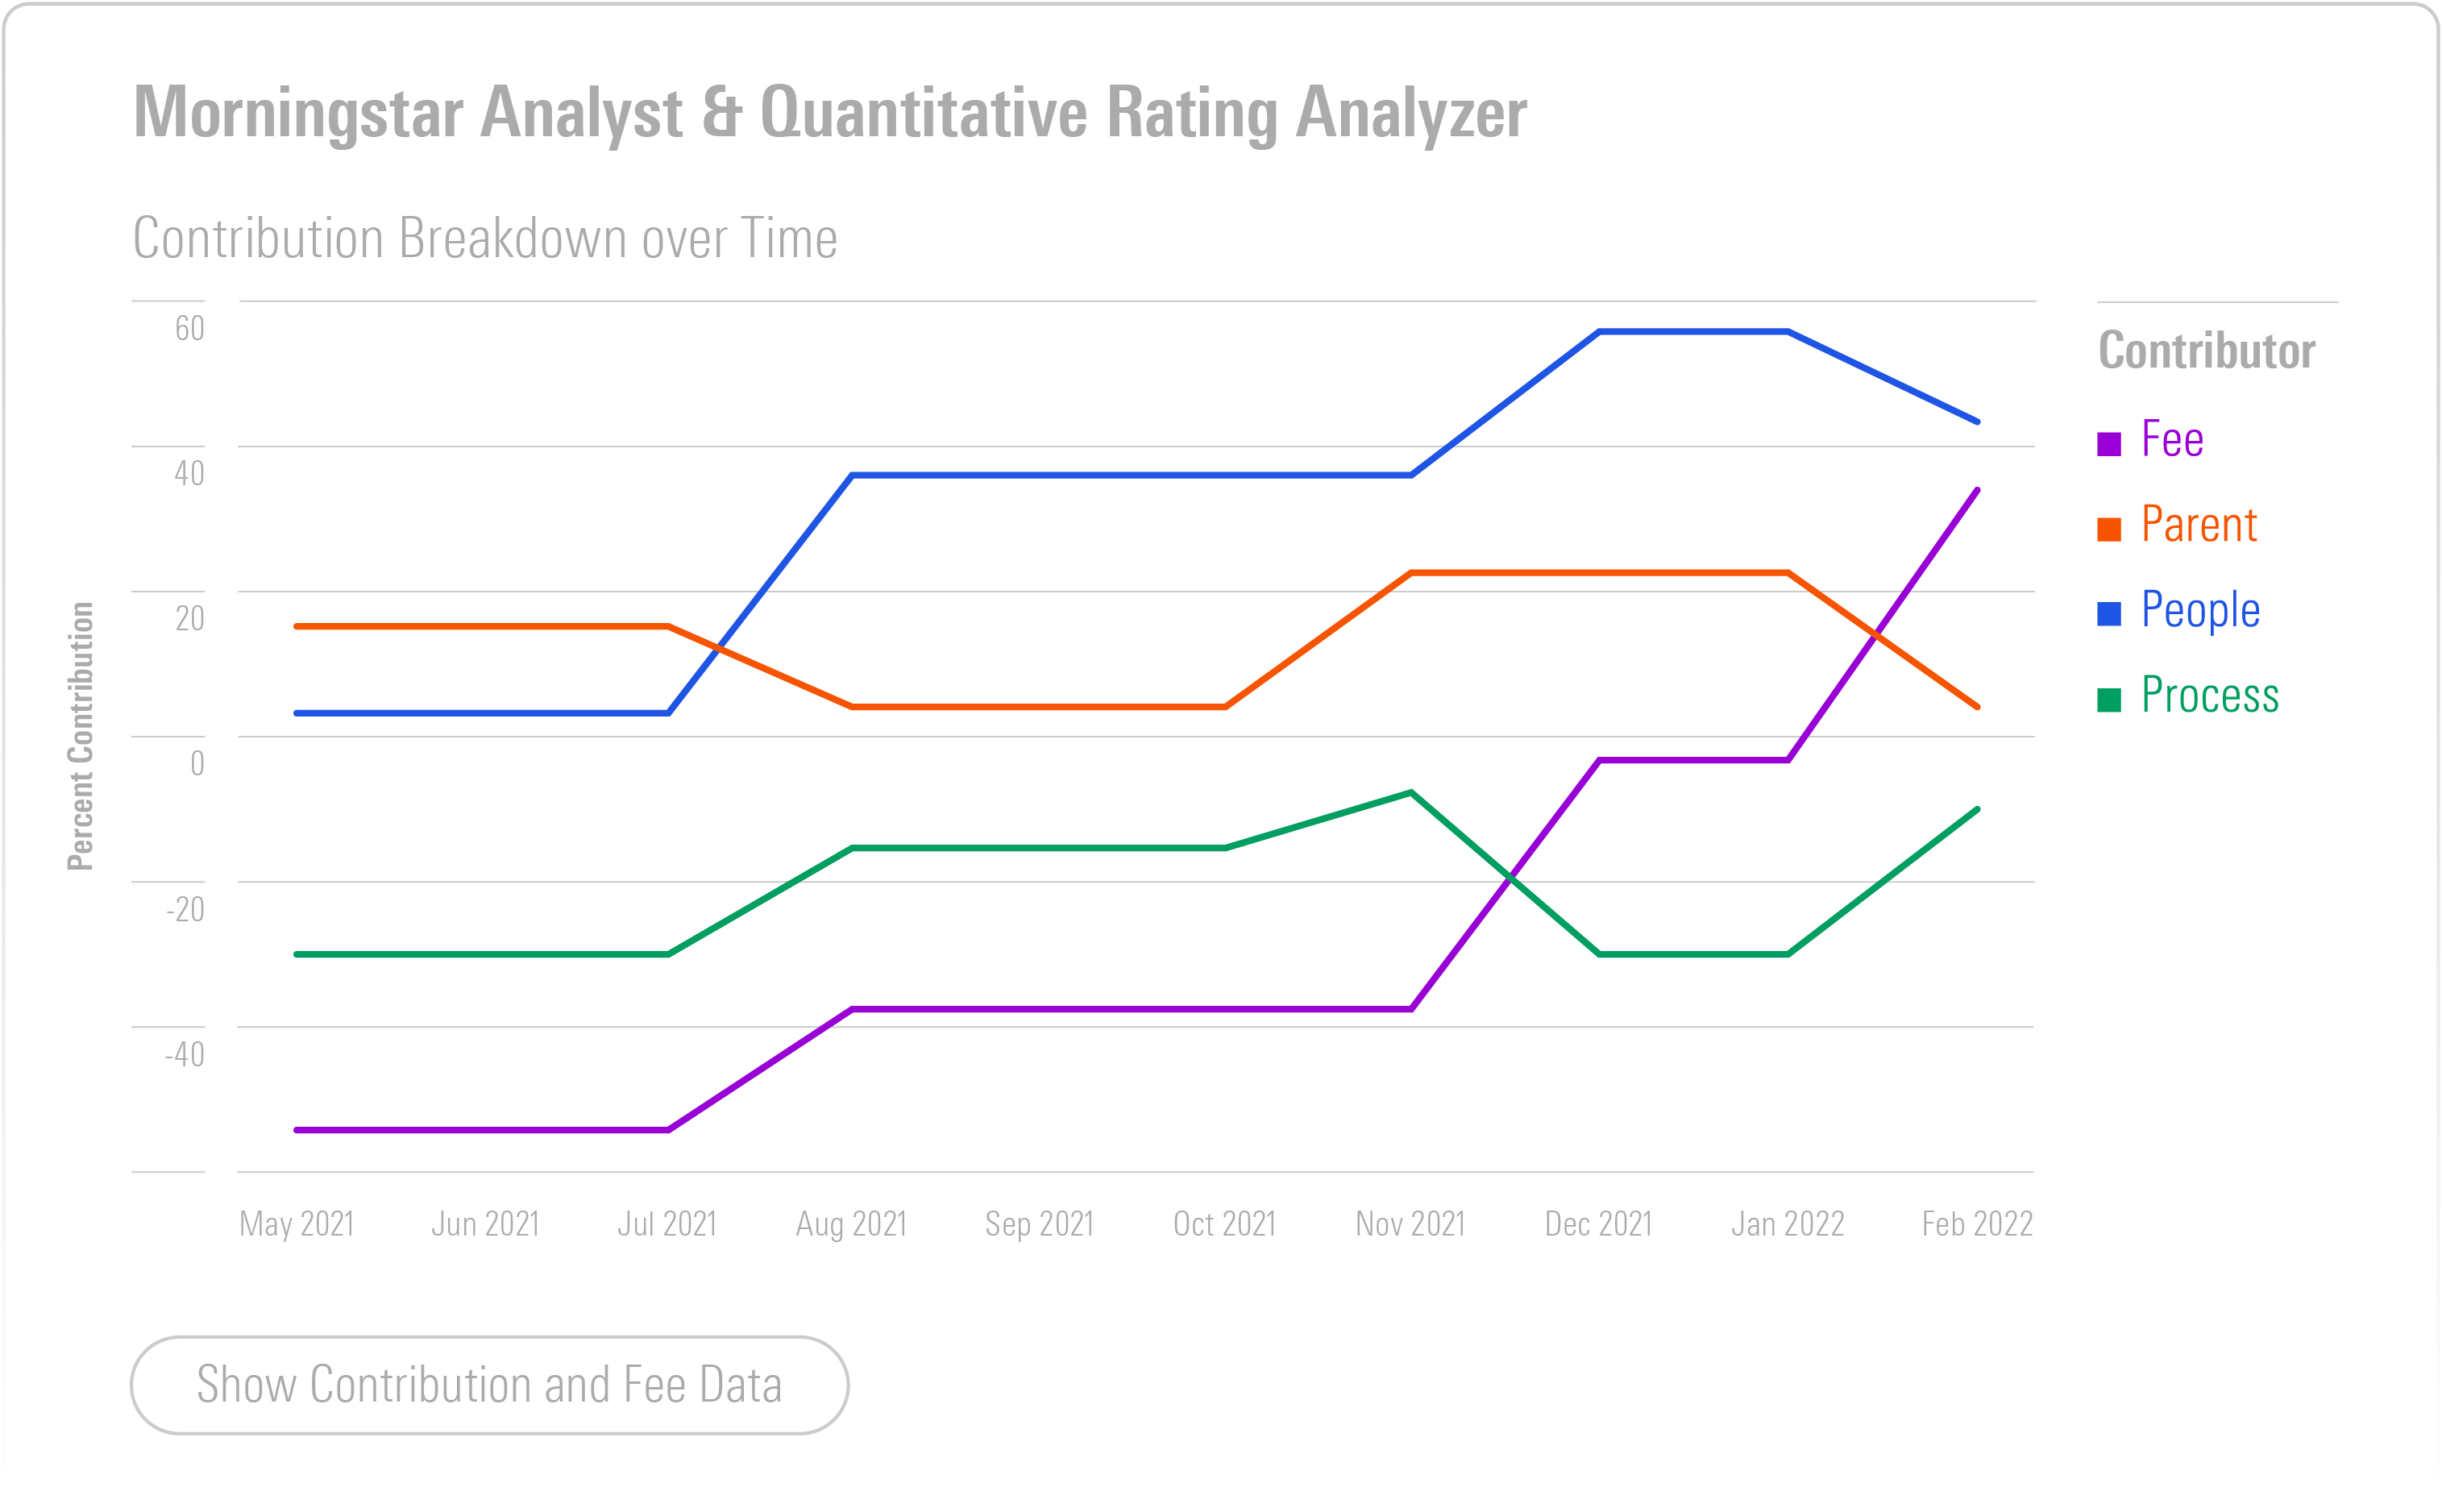 Illustration of an analyst and quantitative rating breakdown